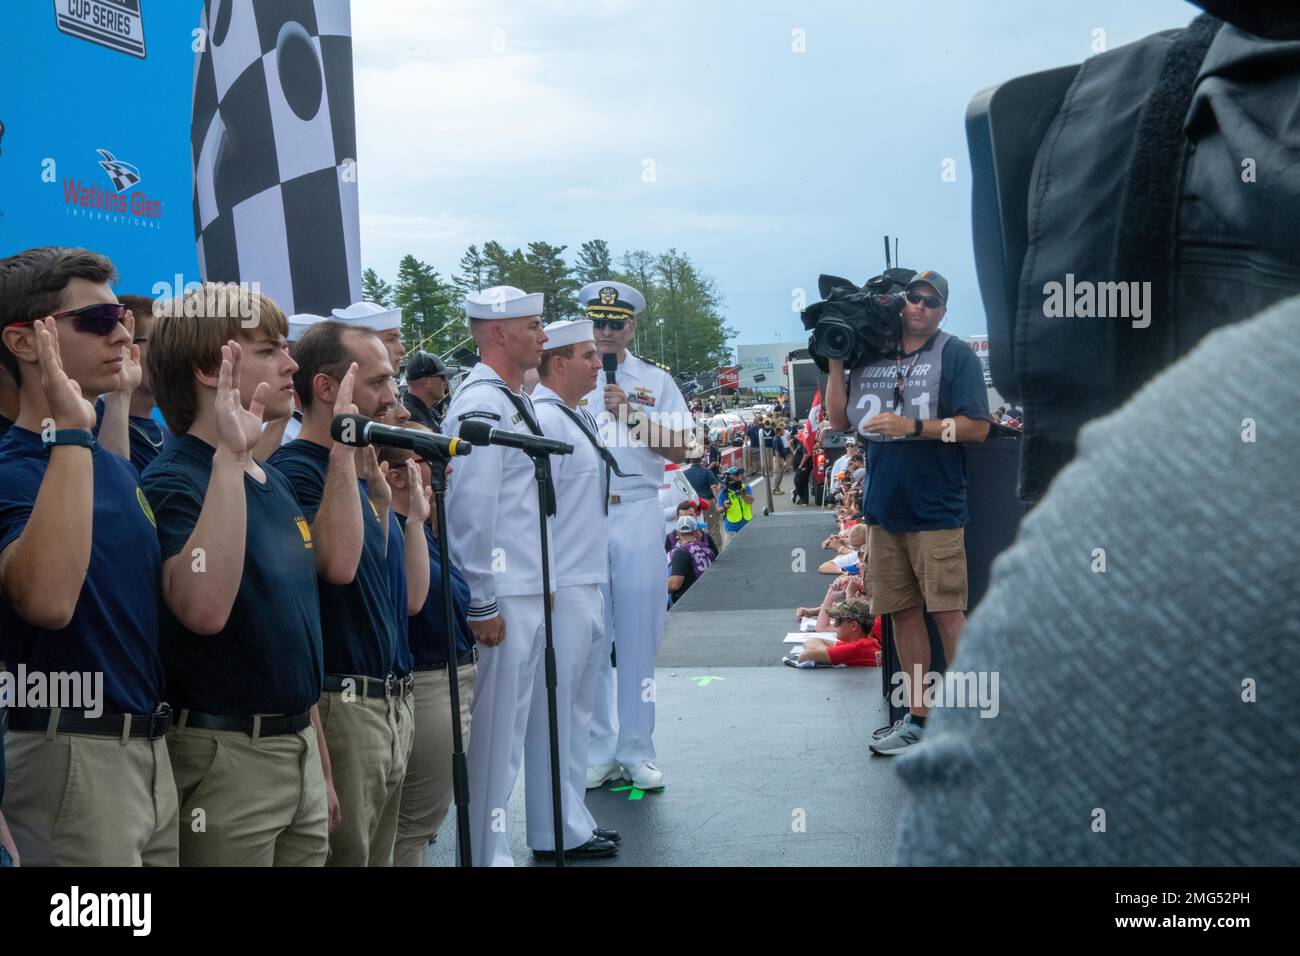 220821-N-UK583-0058 WATKINS GLEN, N.Y. (August 21, 2022) — Future Sailors and recruiters from Navy Talent Acquisition Group (NTAG) Pittsburgh pose for a photo at the Go Bowling at The Glen, NASCAR Xfinity Series race prior to a mass enlistment ceremony. More than 11 future Sailors took the oath of enlistment at the event. Cmdr. Christopher McCurry, commanding officer of NTAG Pittsburgh administered the oath. NTAG Pittsburgh, part of Navy Recruiting Command, recruits the next generation of Navy Sailors throughout areas in Pennsylvania, New York, West Virginia, and Maryland. Stock Photo